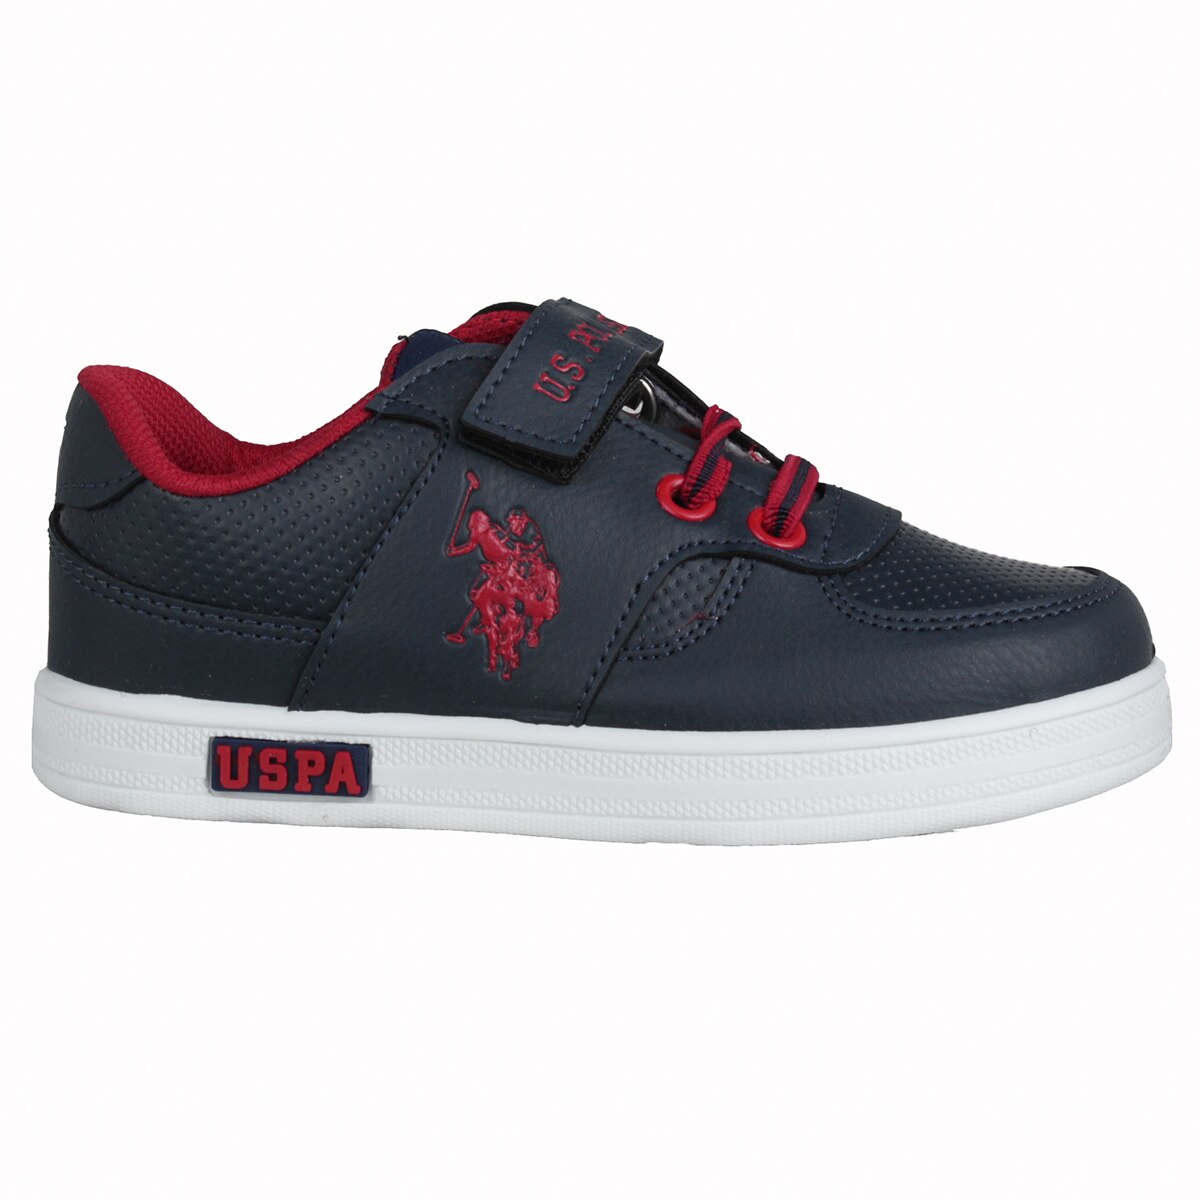 Polo Assn Cameron Casual Male Child Sport Shoes